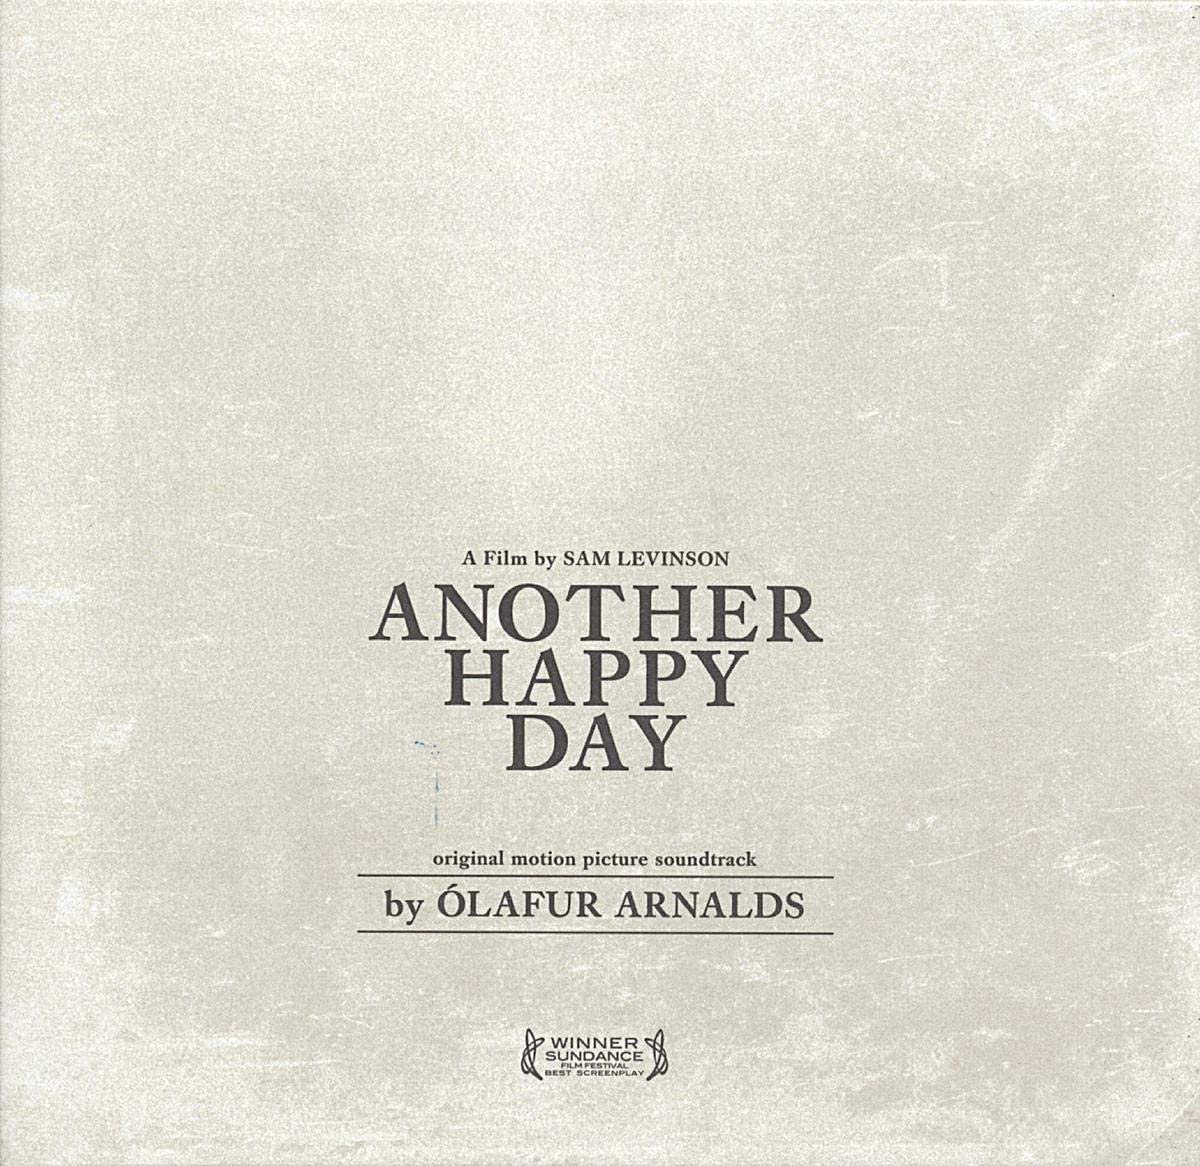 Olafur Arnalds - Another Happy Day (Original Motion Picture Soundtrack)